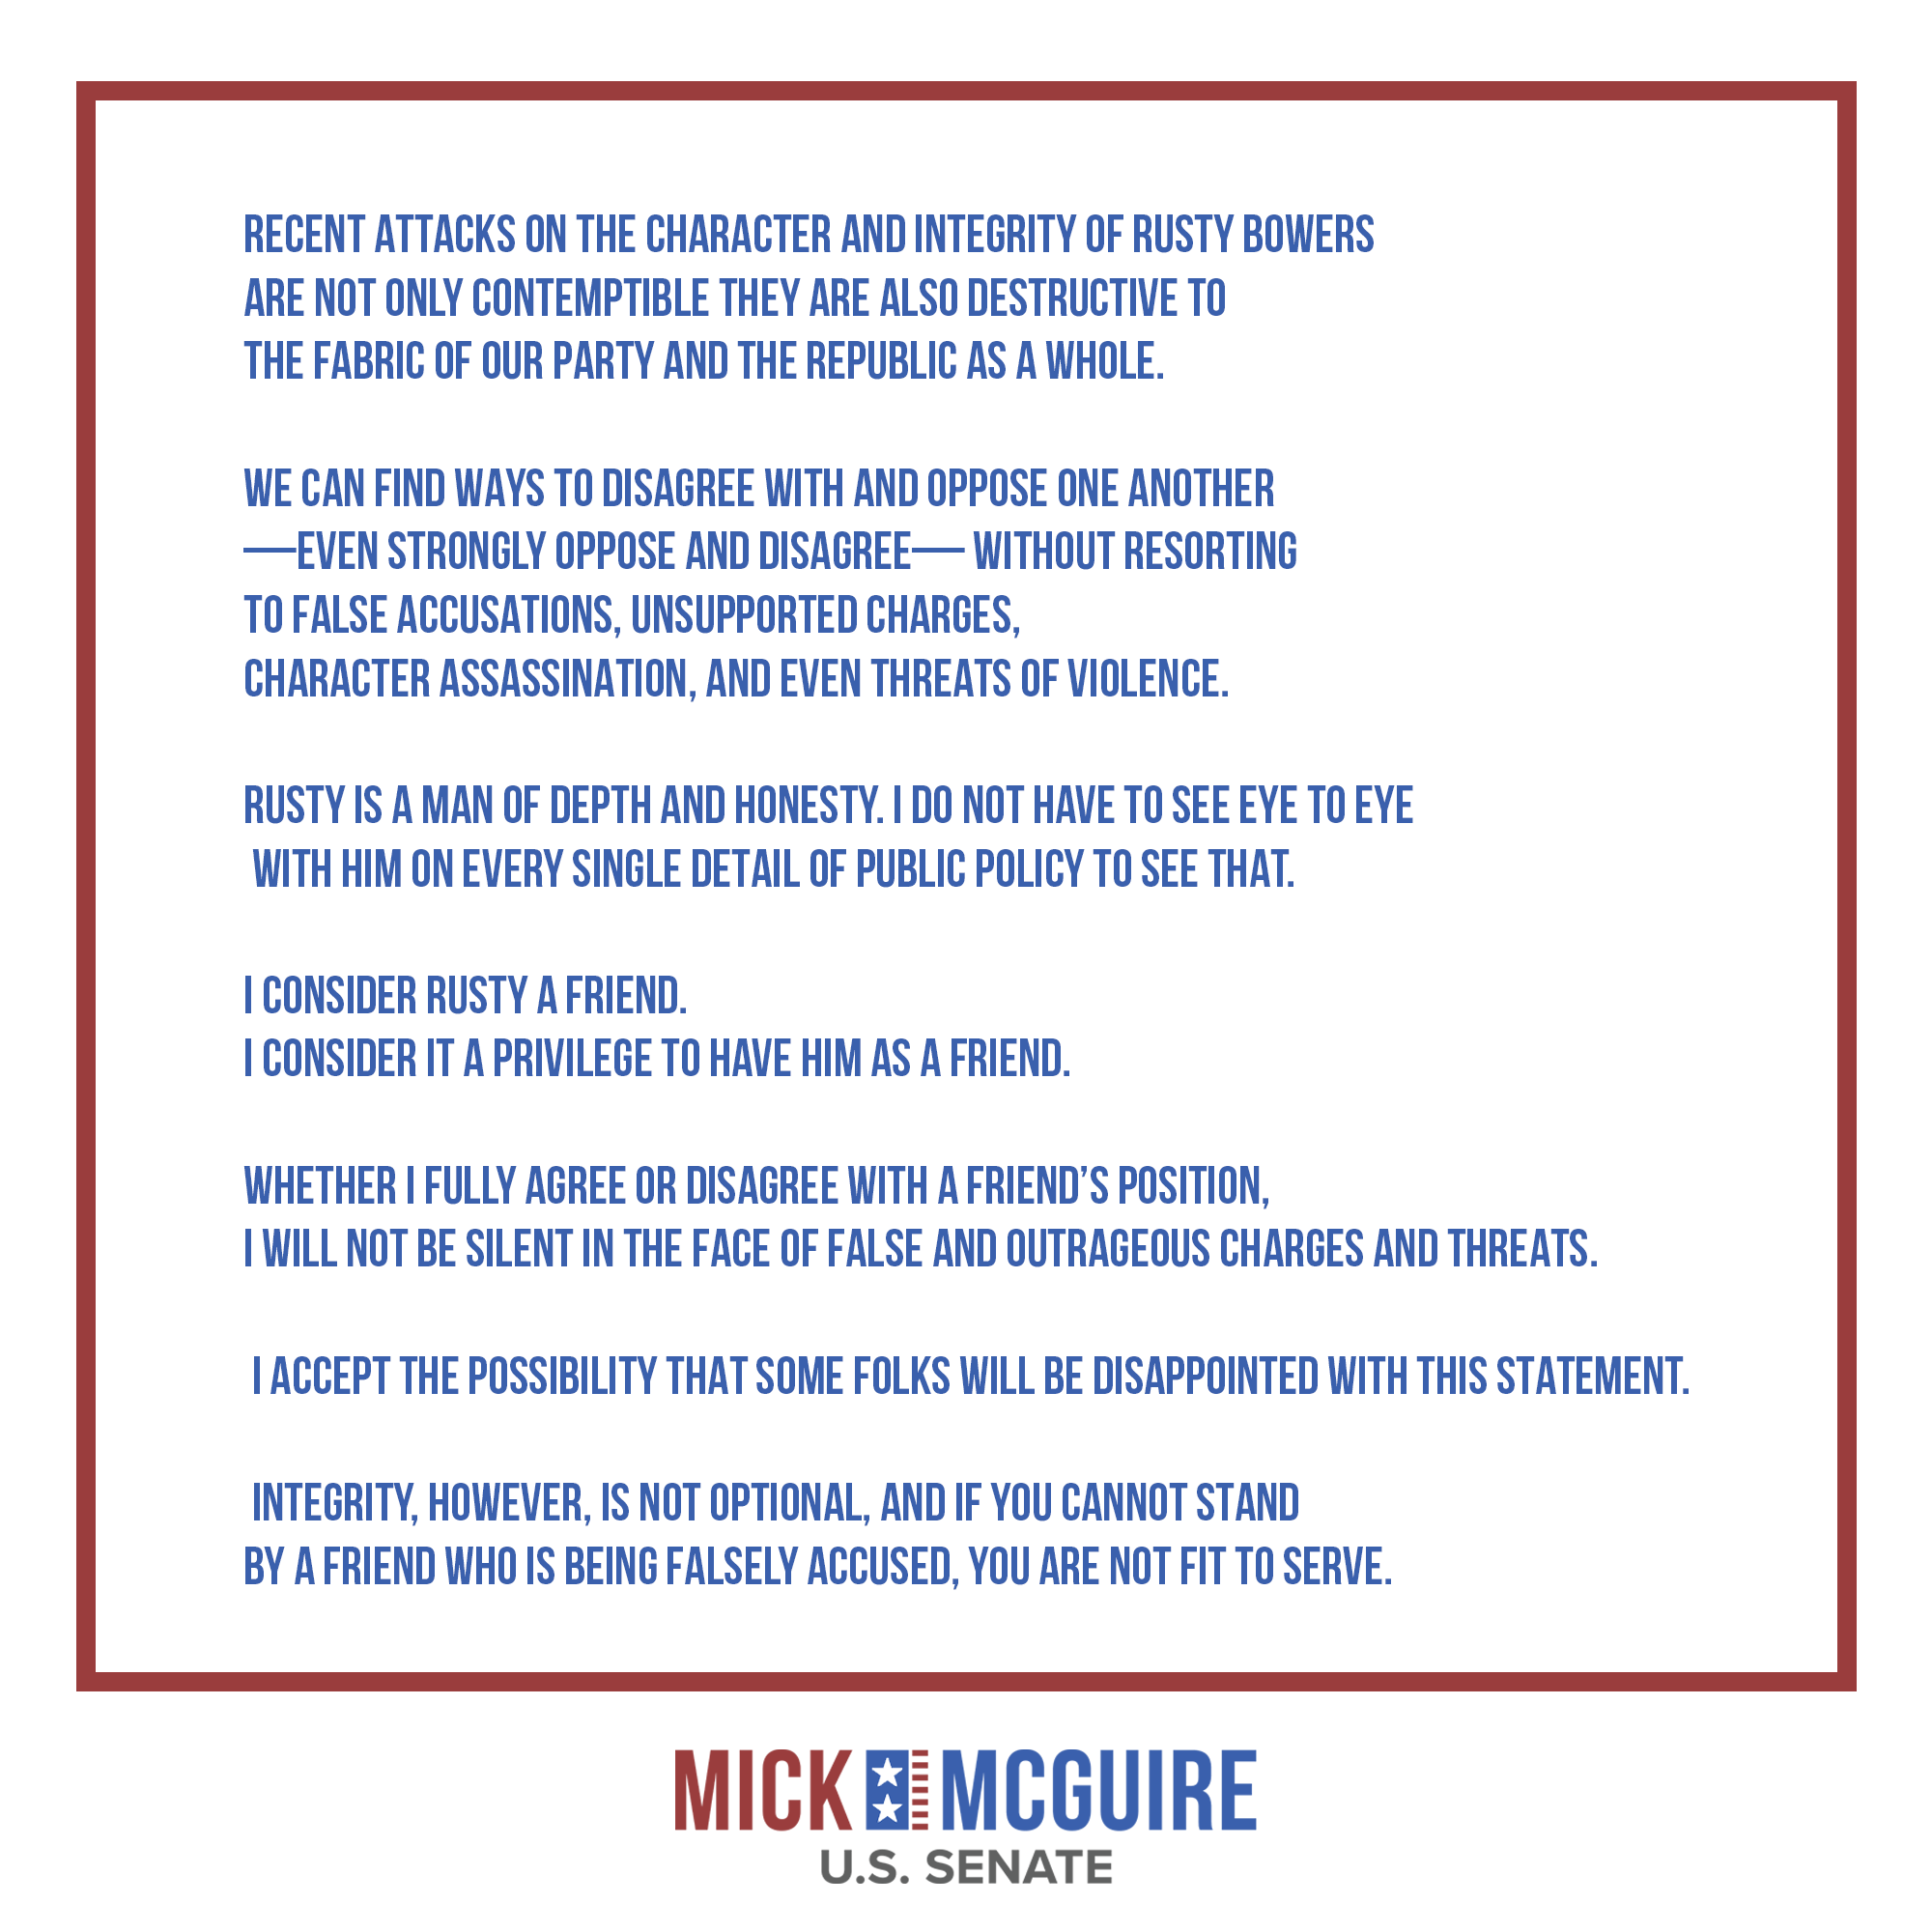 Mick Mcguire Recent Attacks On The Character Amp Integrity Of Rusty Bowers Are Contemptible I Accept The Possibility That Some Will Be Disappointed With This Statement Integrity However Is Not